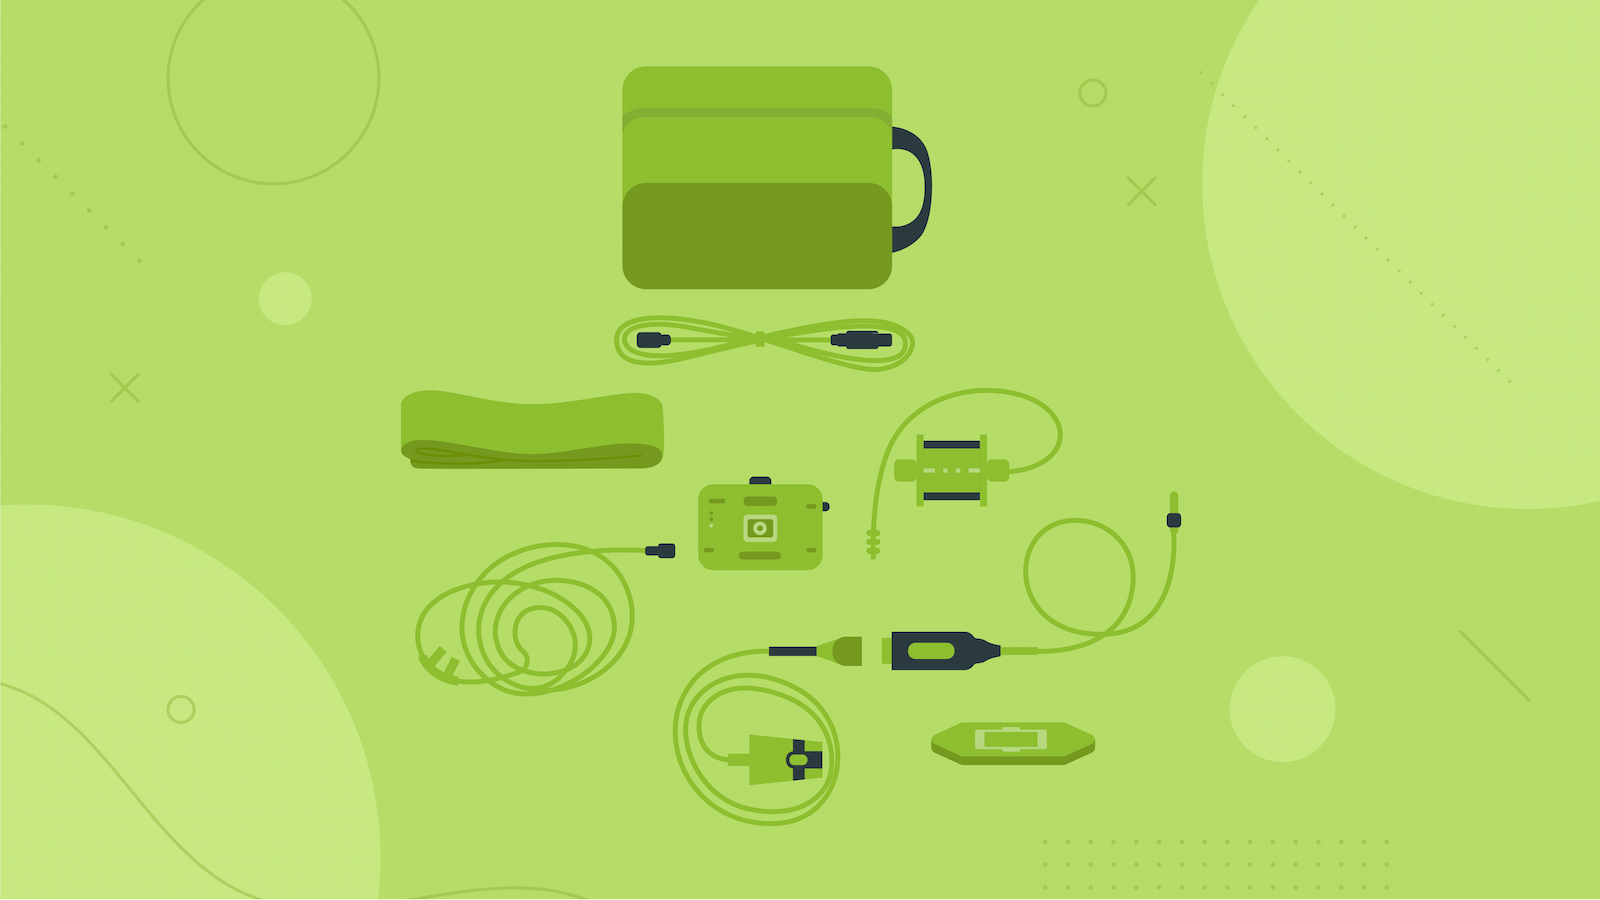 Illustration of components typically used with a Type 3 HSAT device including straps, cannula, pulse oximeter, carrying case, tubes, and clamps